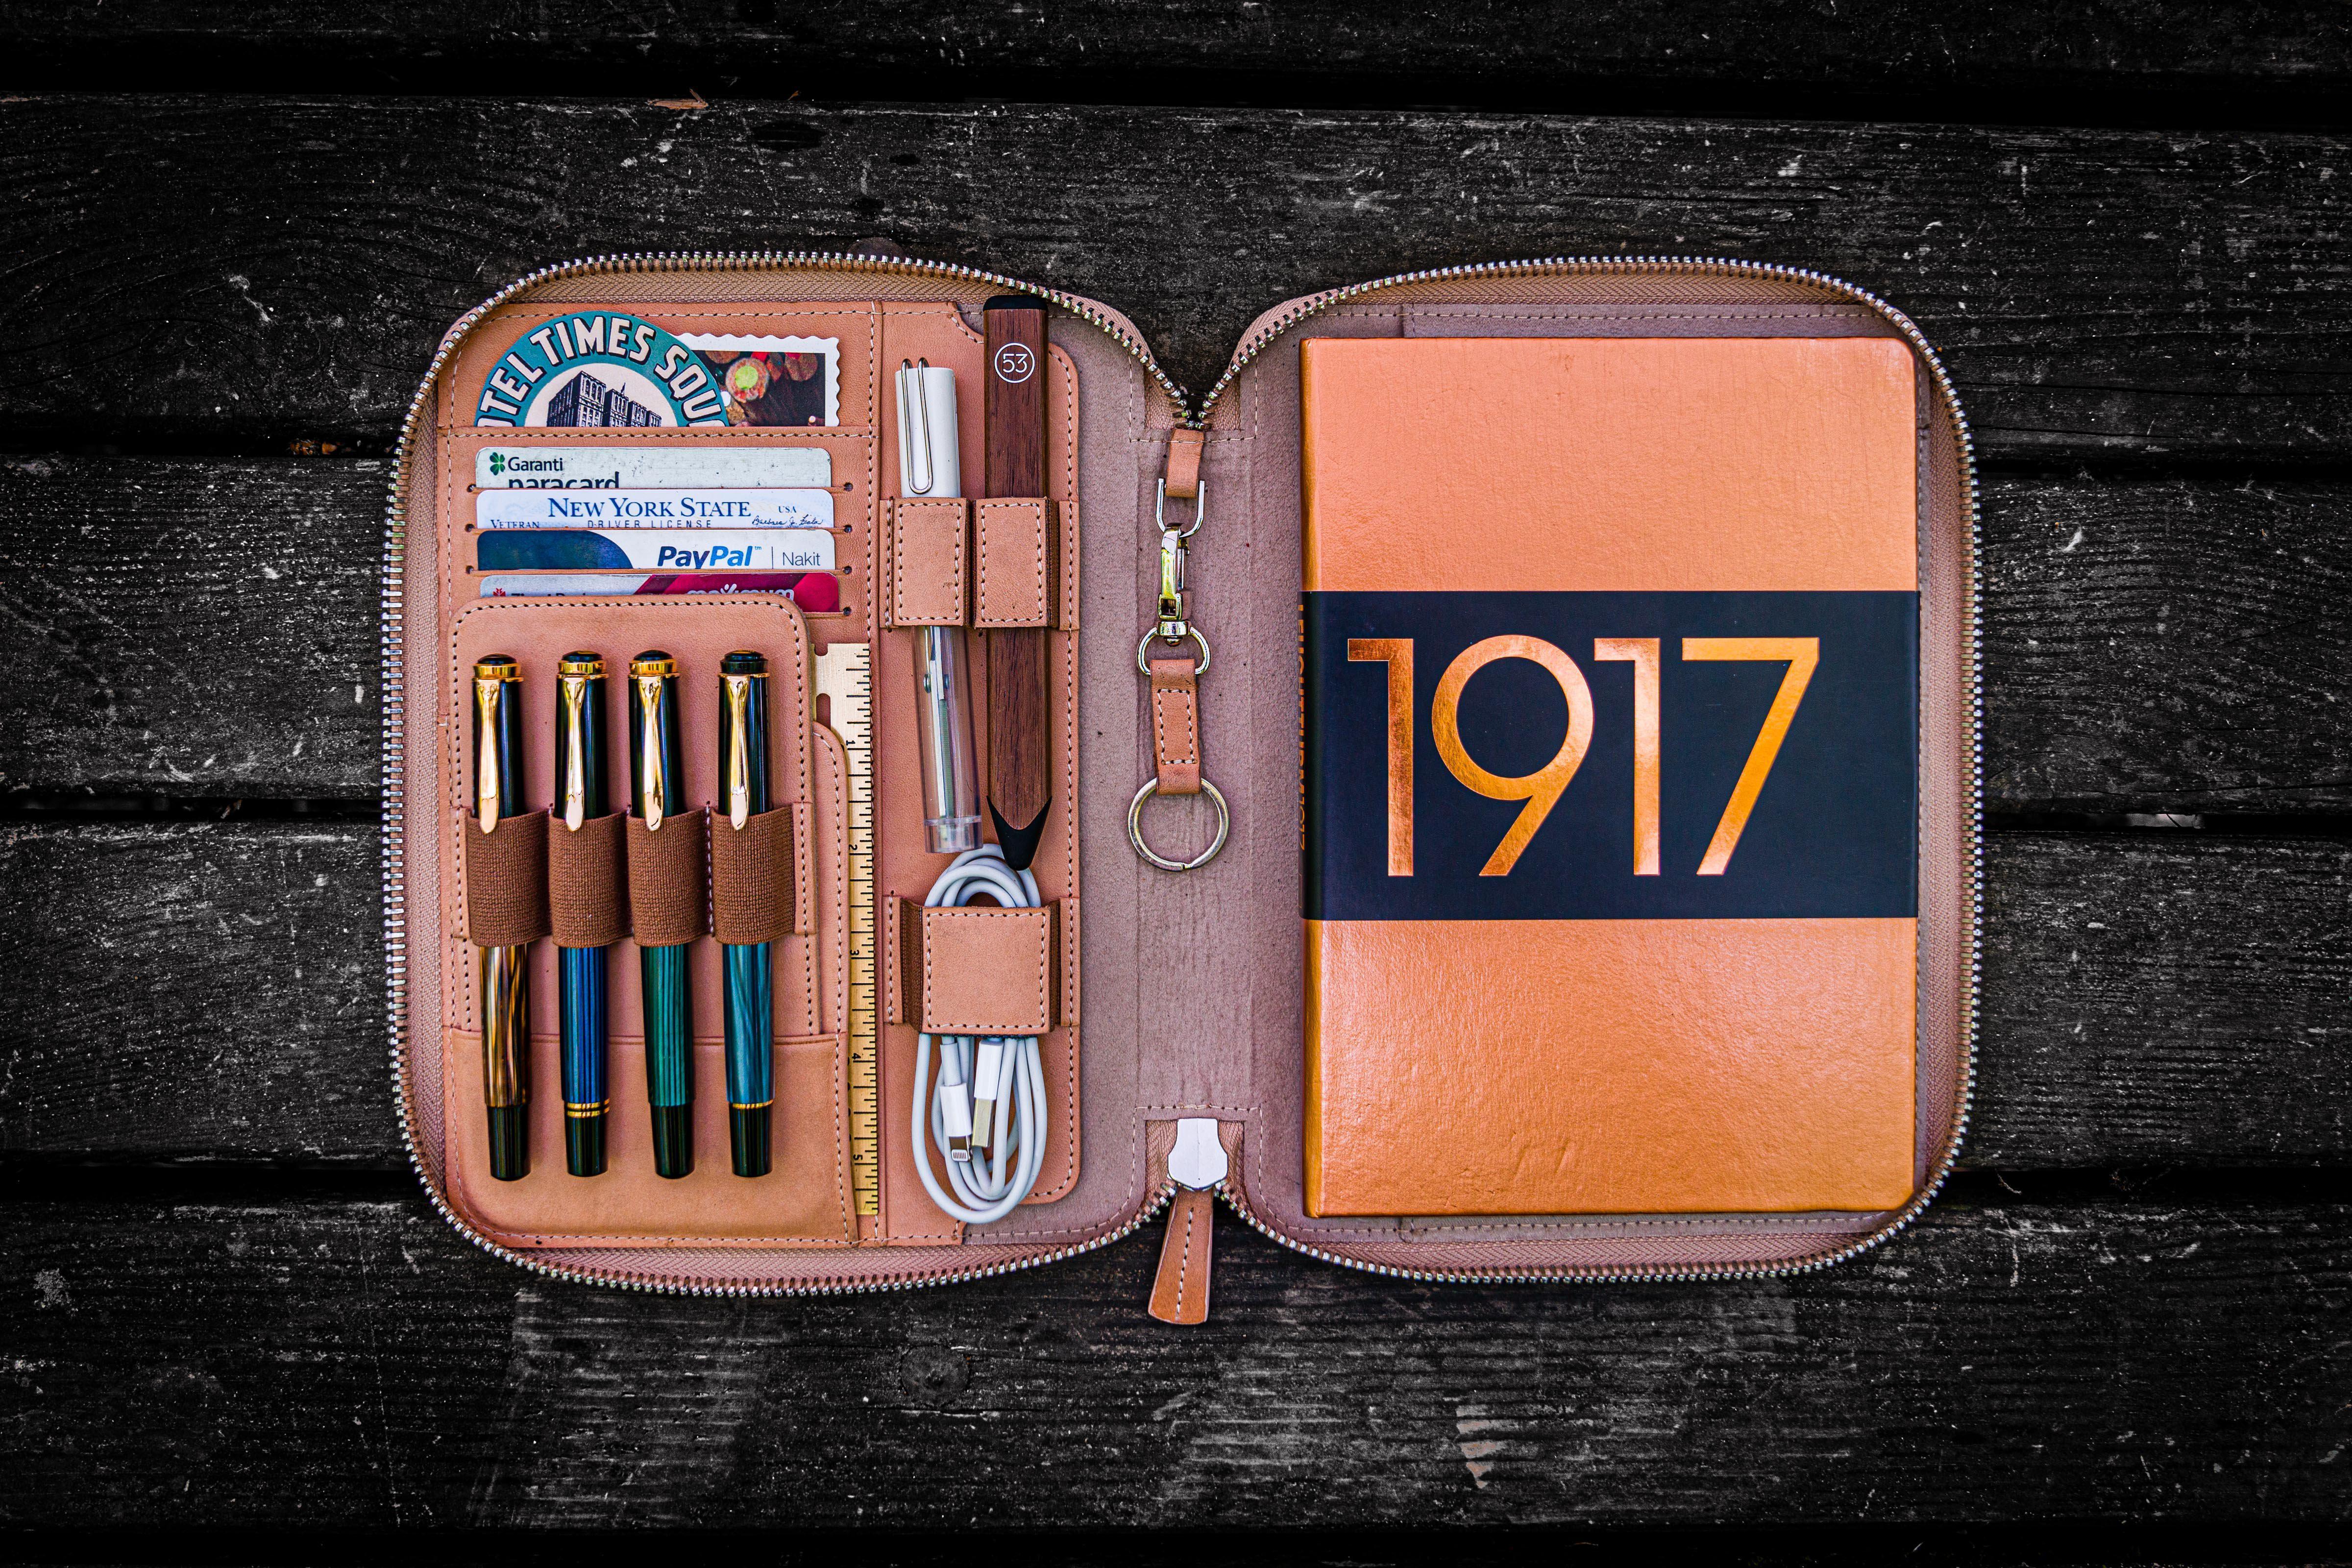 Sketching pencil set (53 pencils) including two sketchbooks A4 and A5  Pencil sketching set in zippered travel pouch Art pencil set for sketching  and